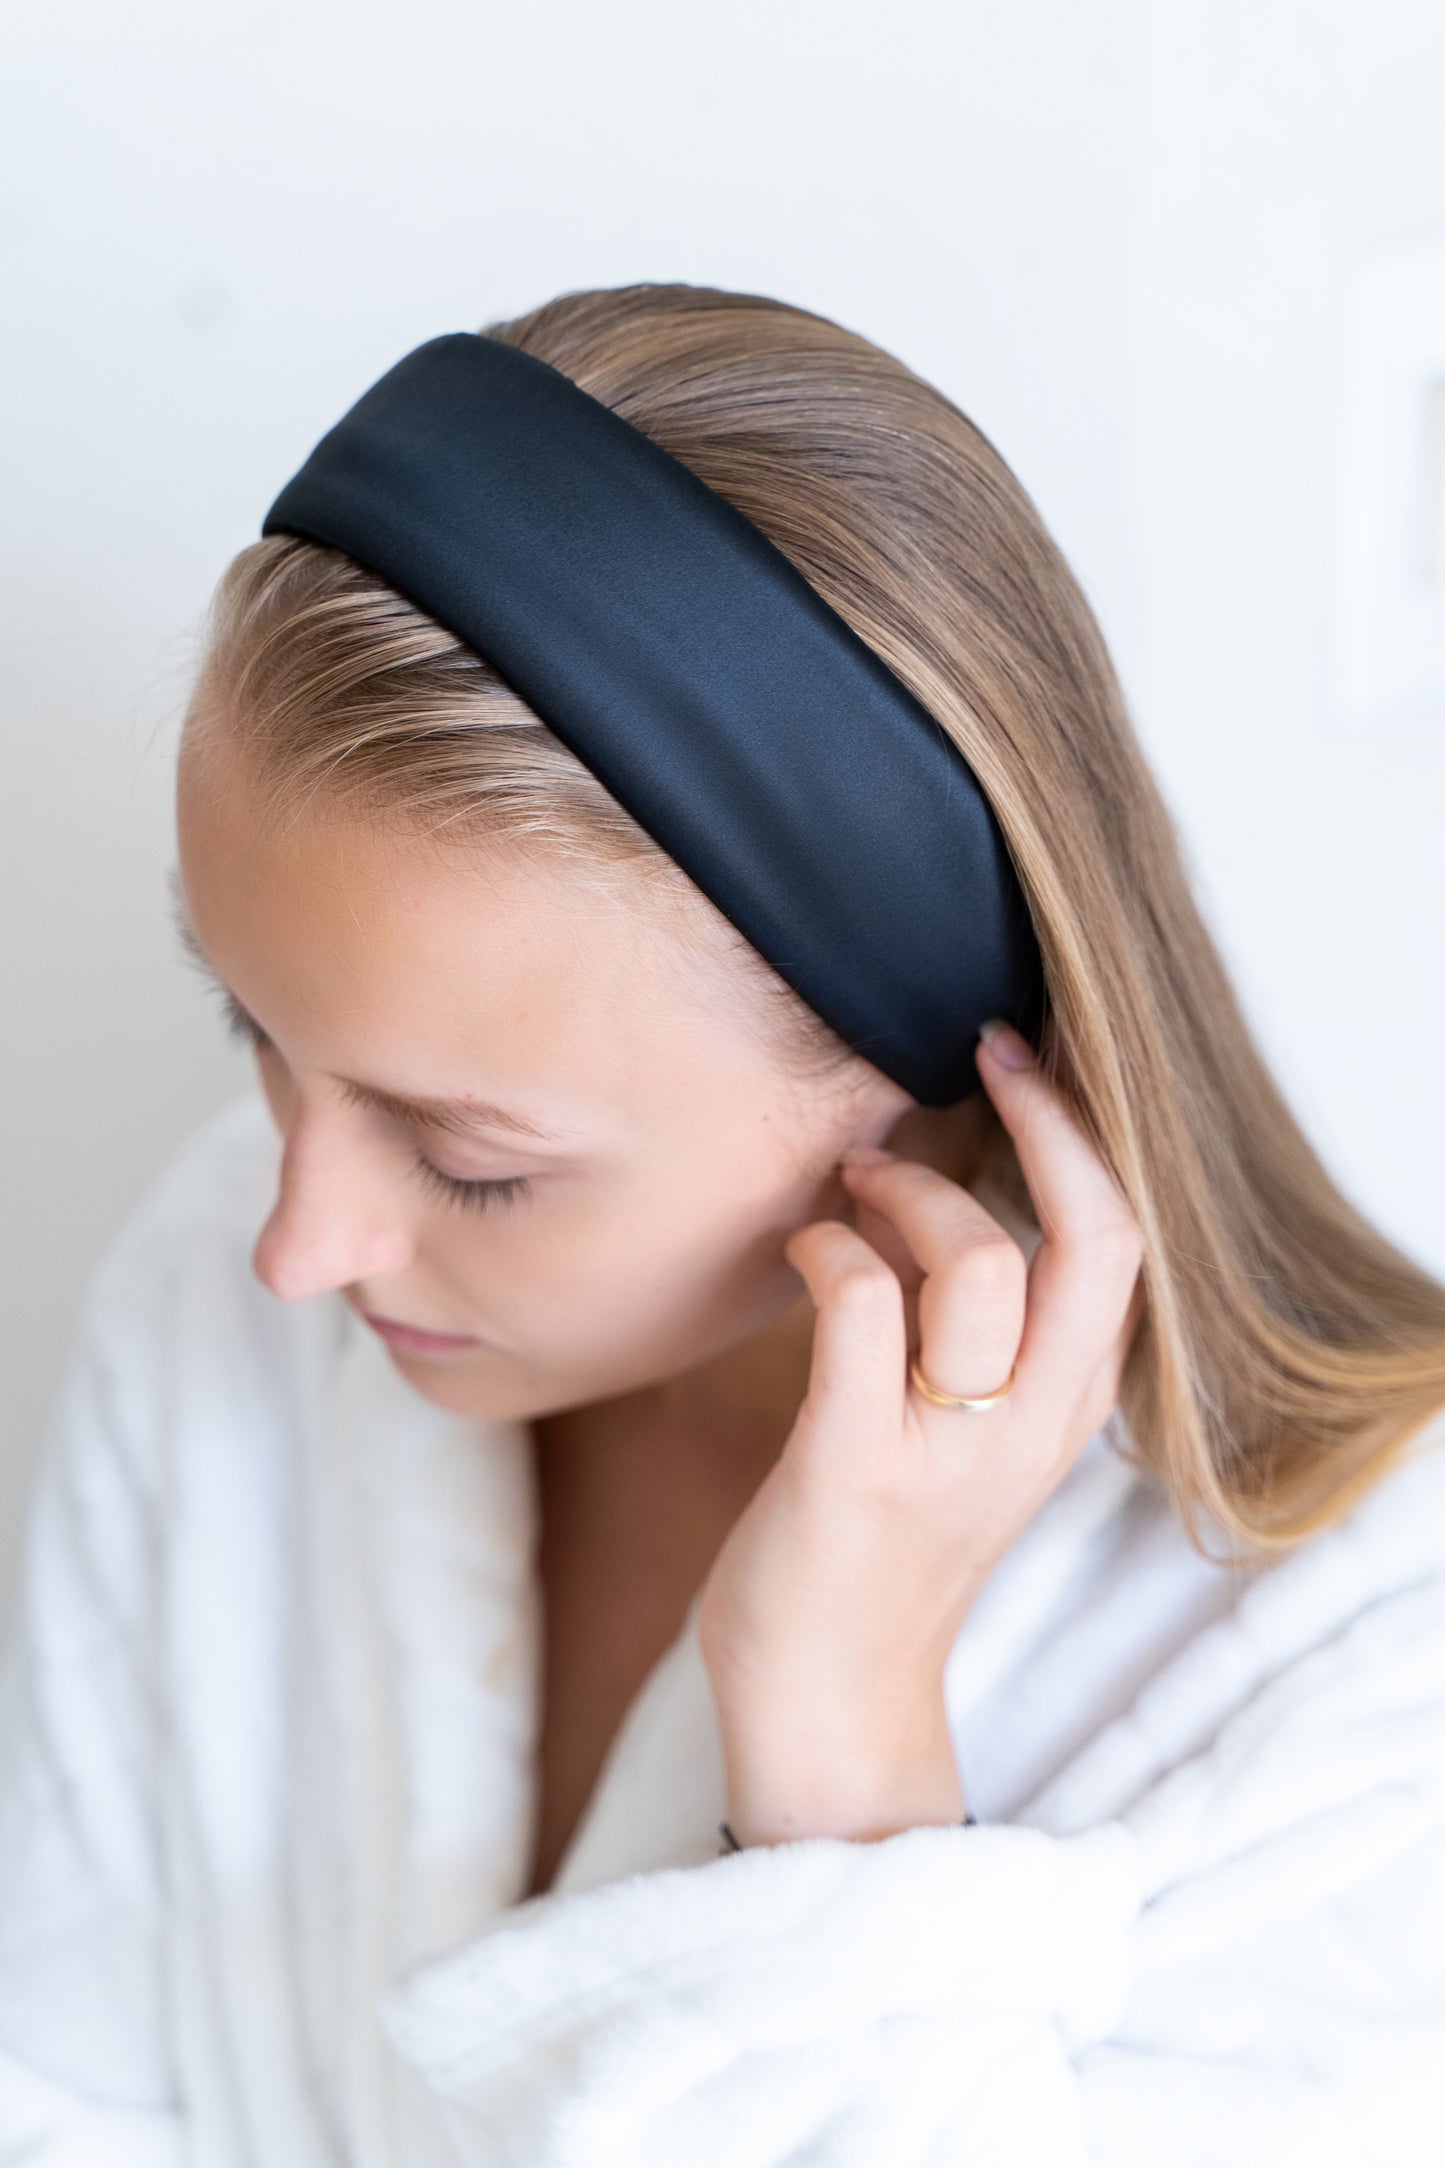 silk spa headband with velcro attachment on woman with blond hair in soft terry cloth robe